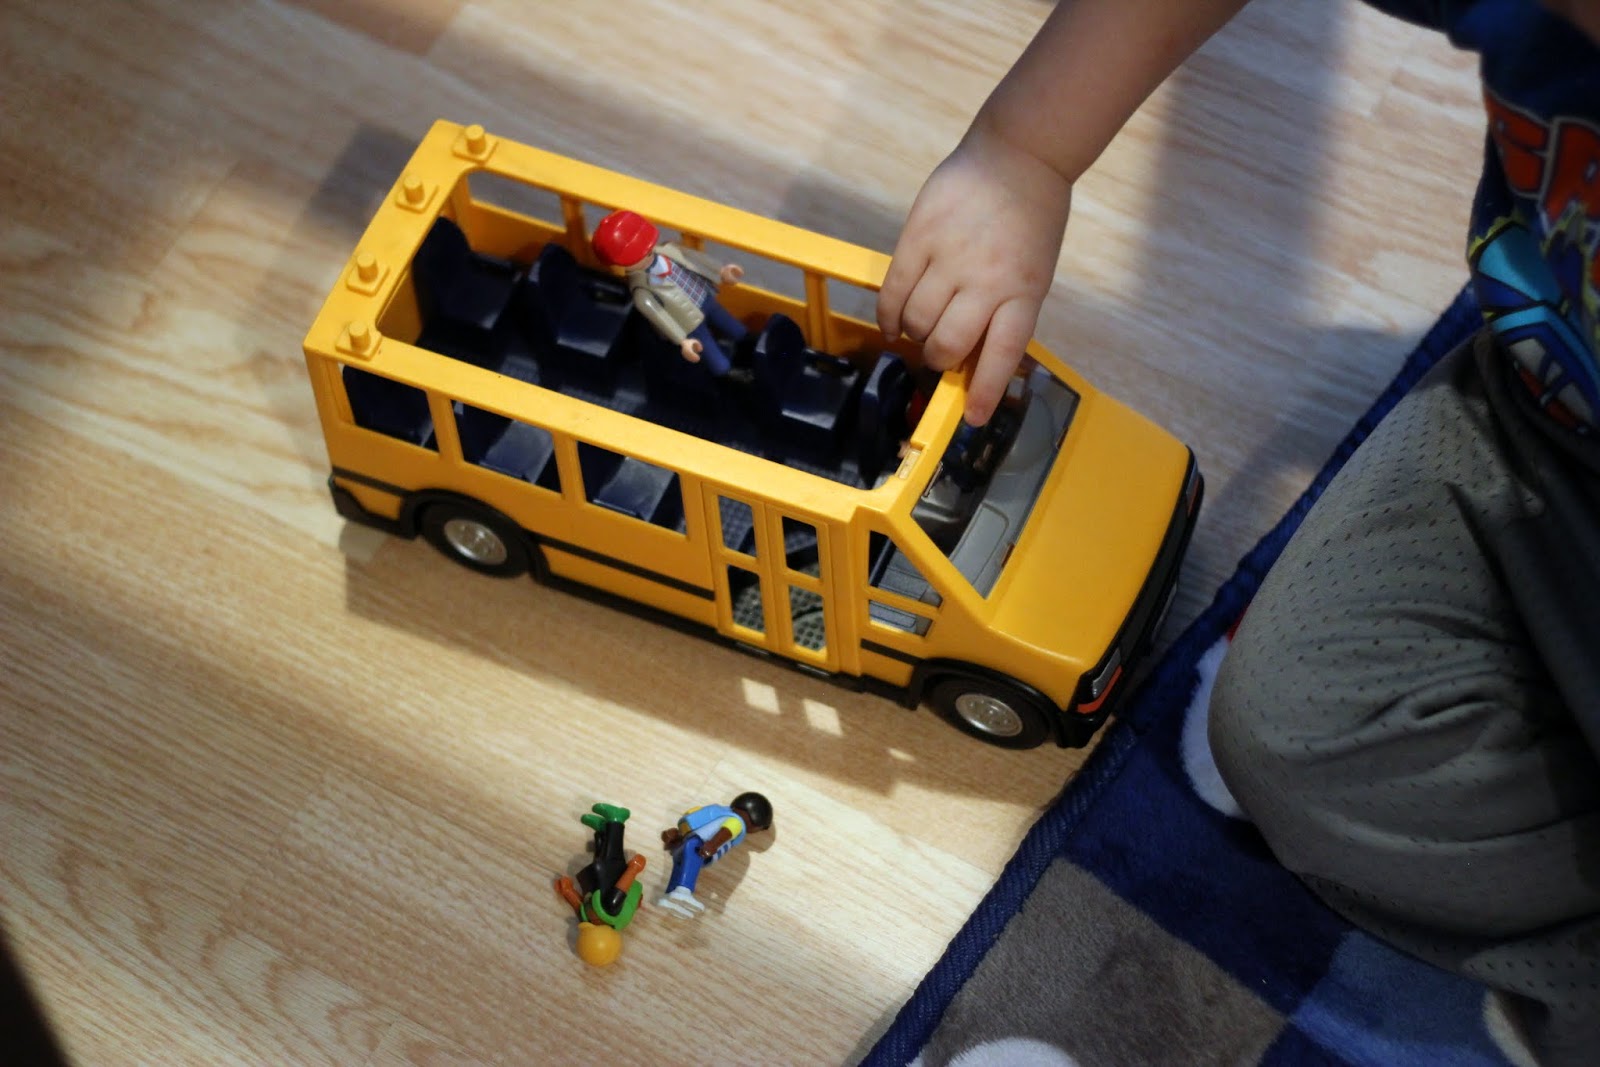 Review of PLAYMOBIL Bus and Schoolhouse!